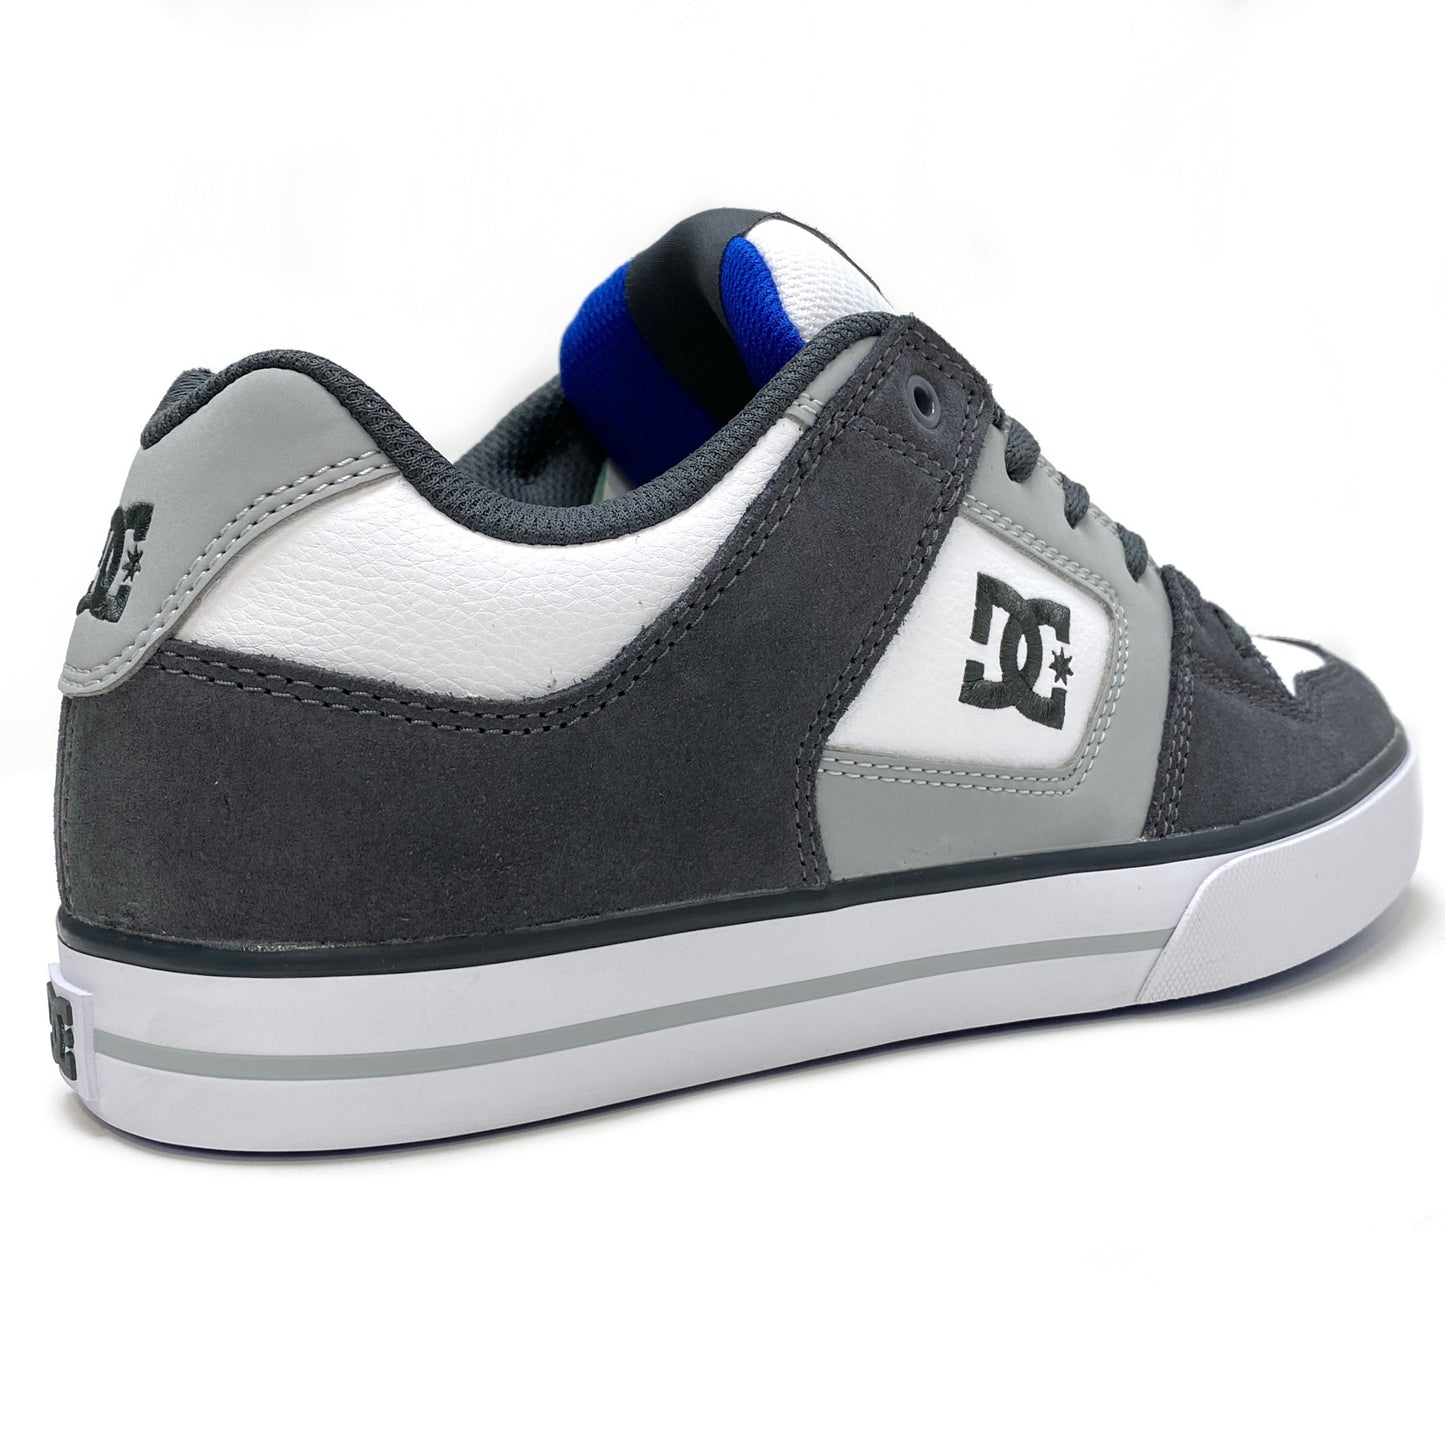 DC SHOES PURE GREY WHITE & BLUE TRAINERS (UK 8 EUR 42)